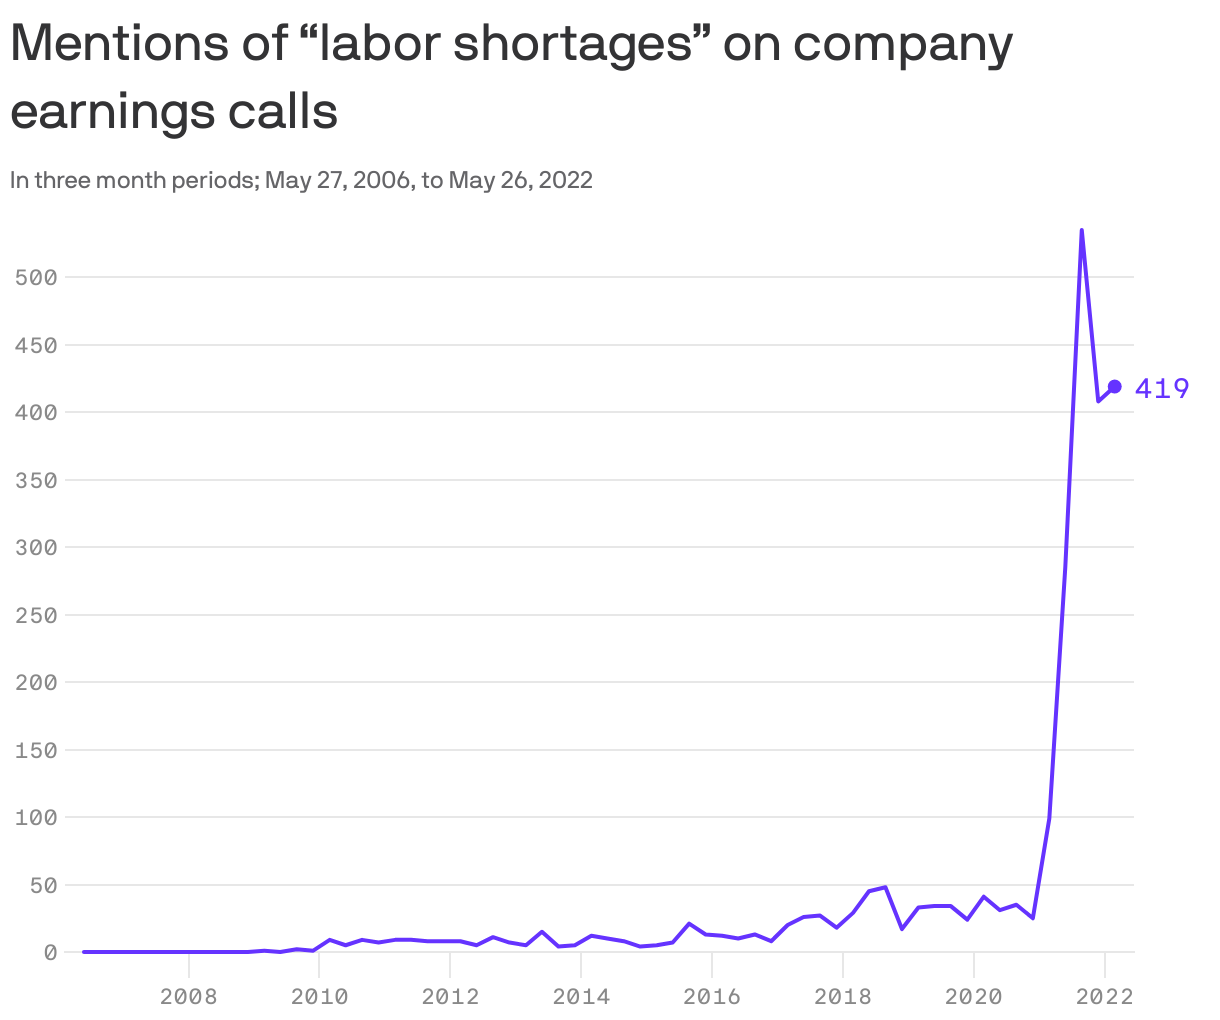 Mentions of “labor shortages” on company earnings calls